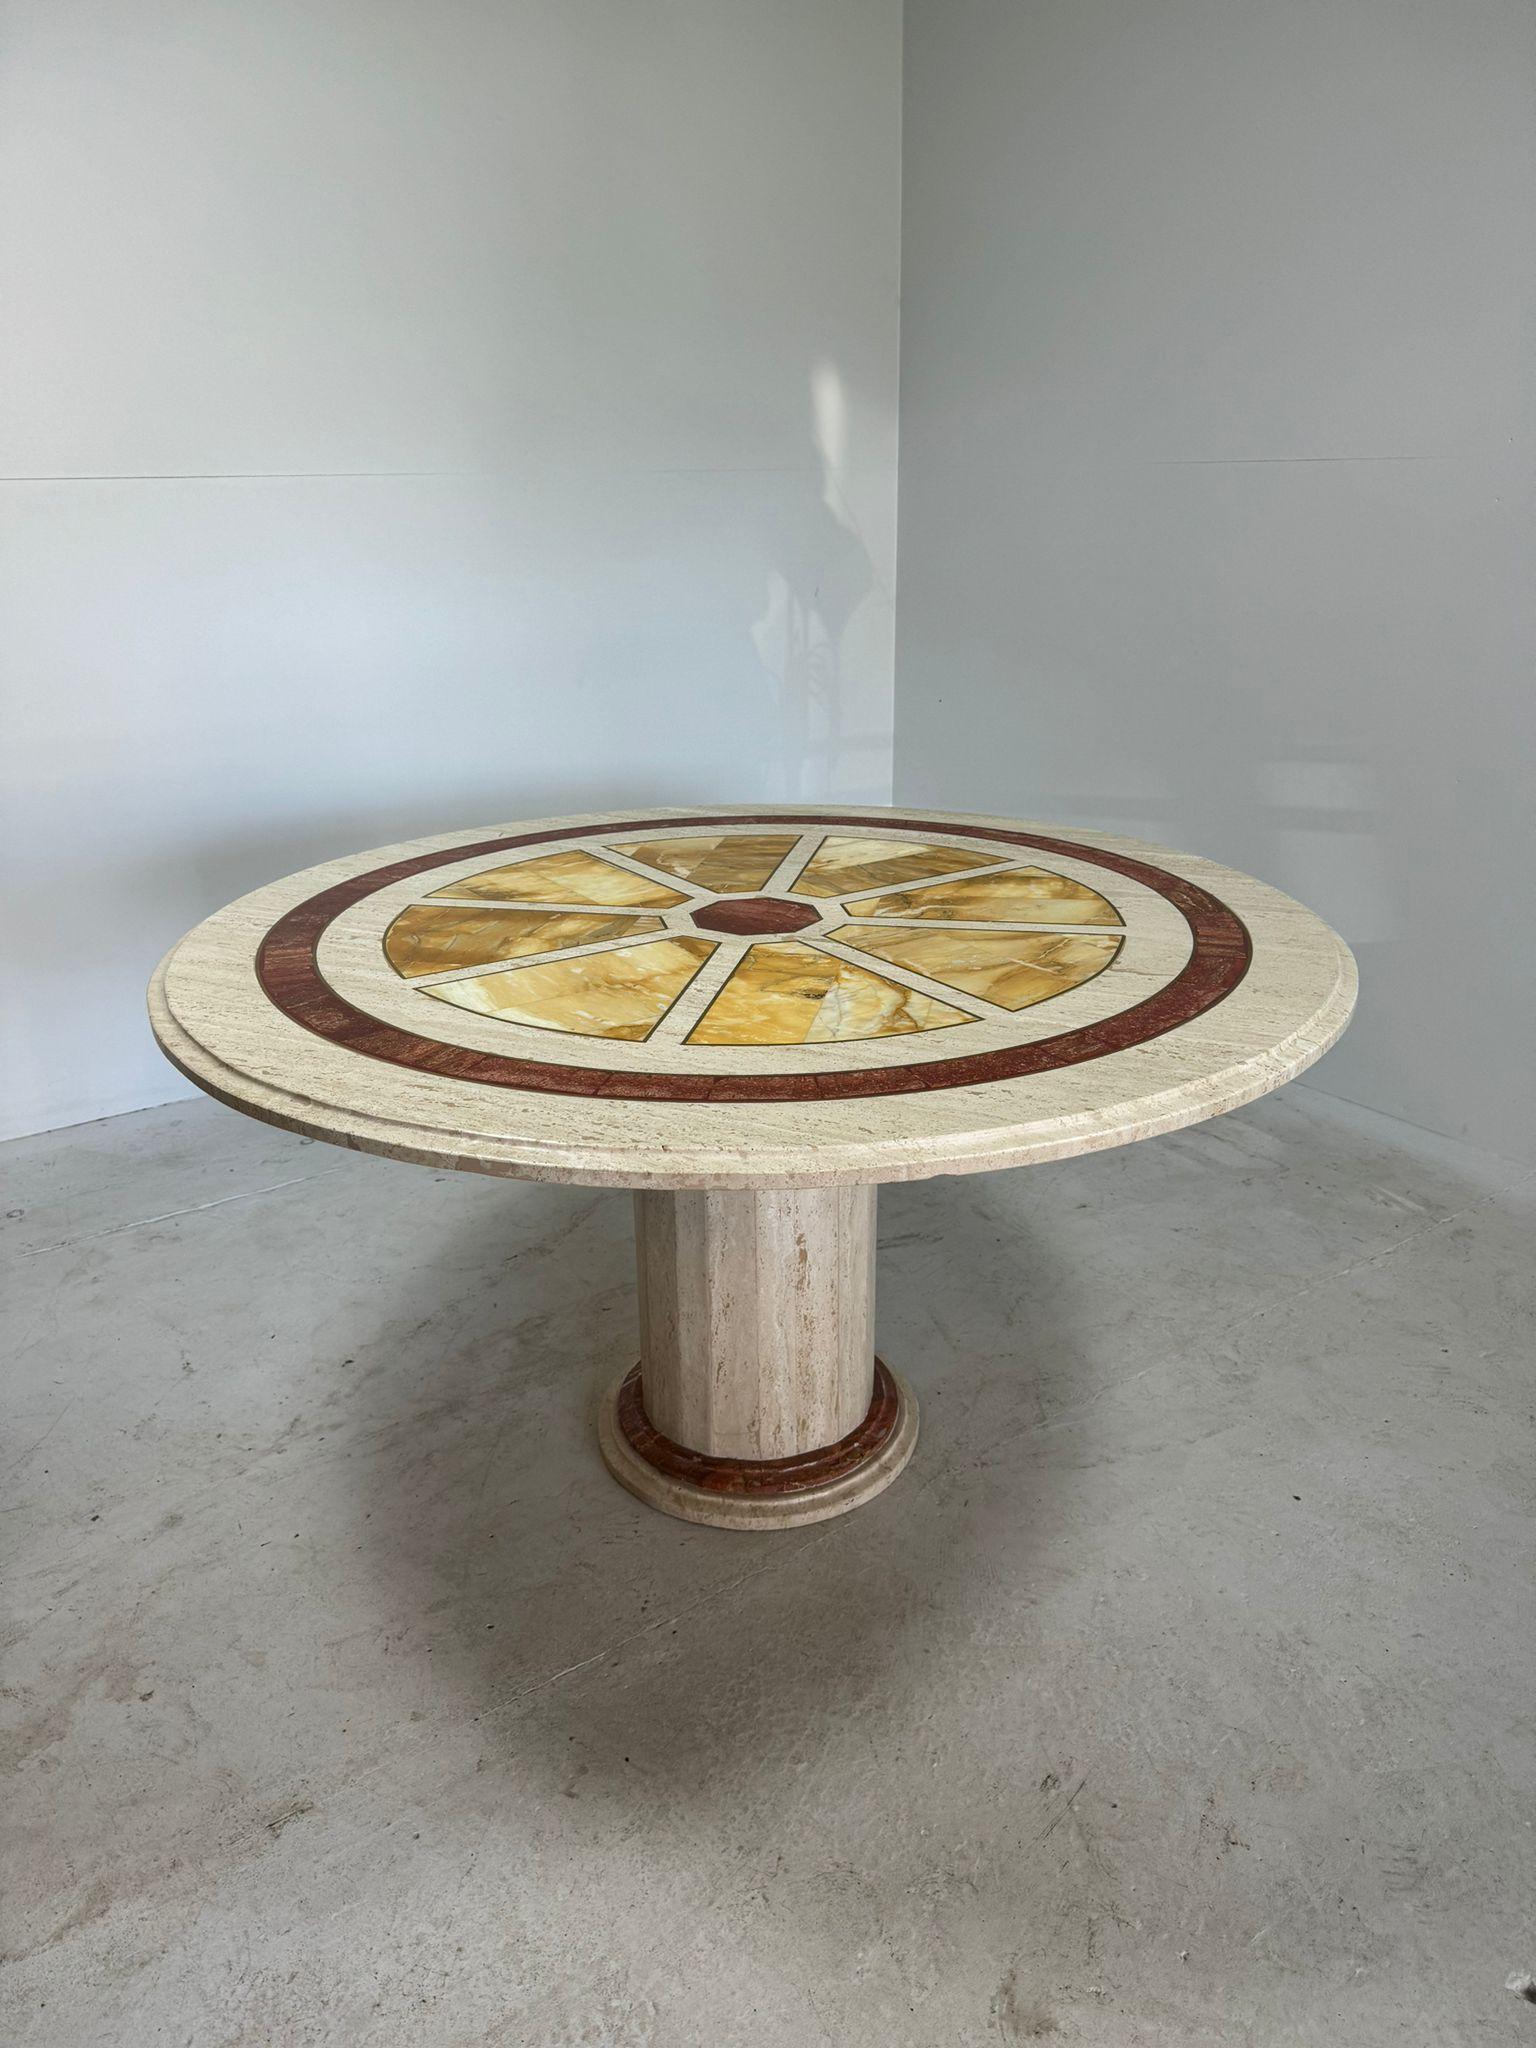 Amazing, monumental round travertine diningtable with yellow and red marble inlay, finished with brass inlay contours.

In very good condition as shown on pictures. One small pinch in the yellow surface.

Comes in 2 parts.

Video on request.

Height